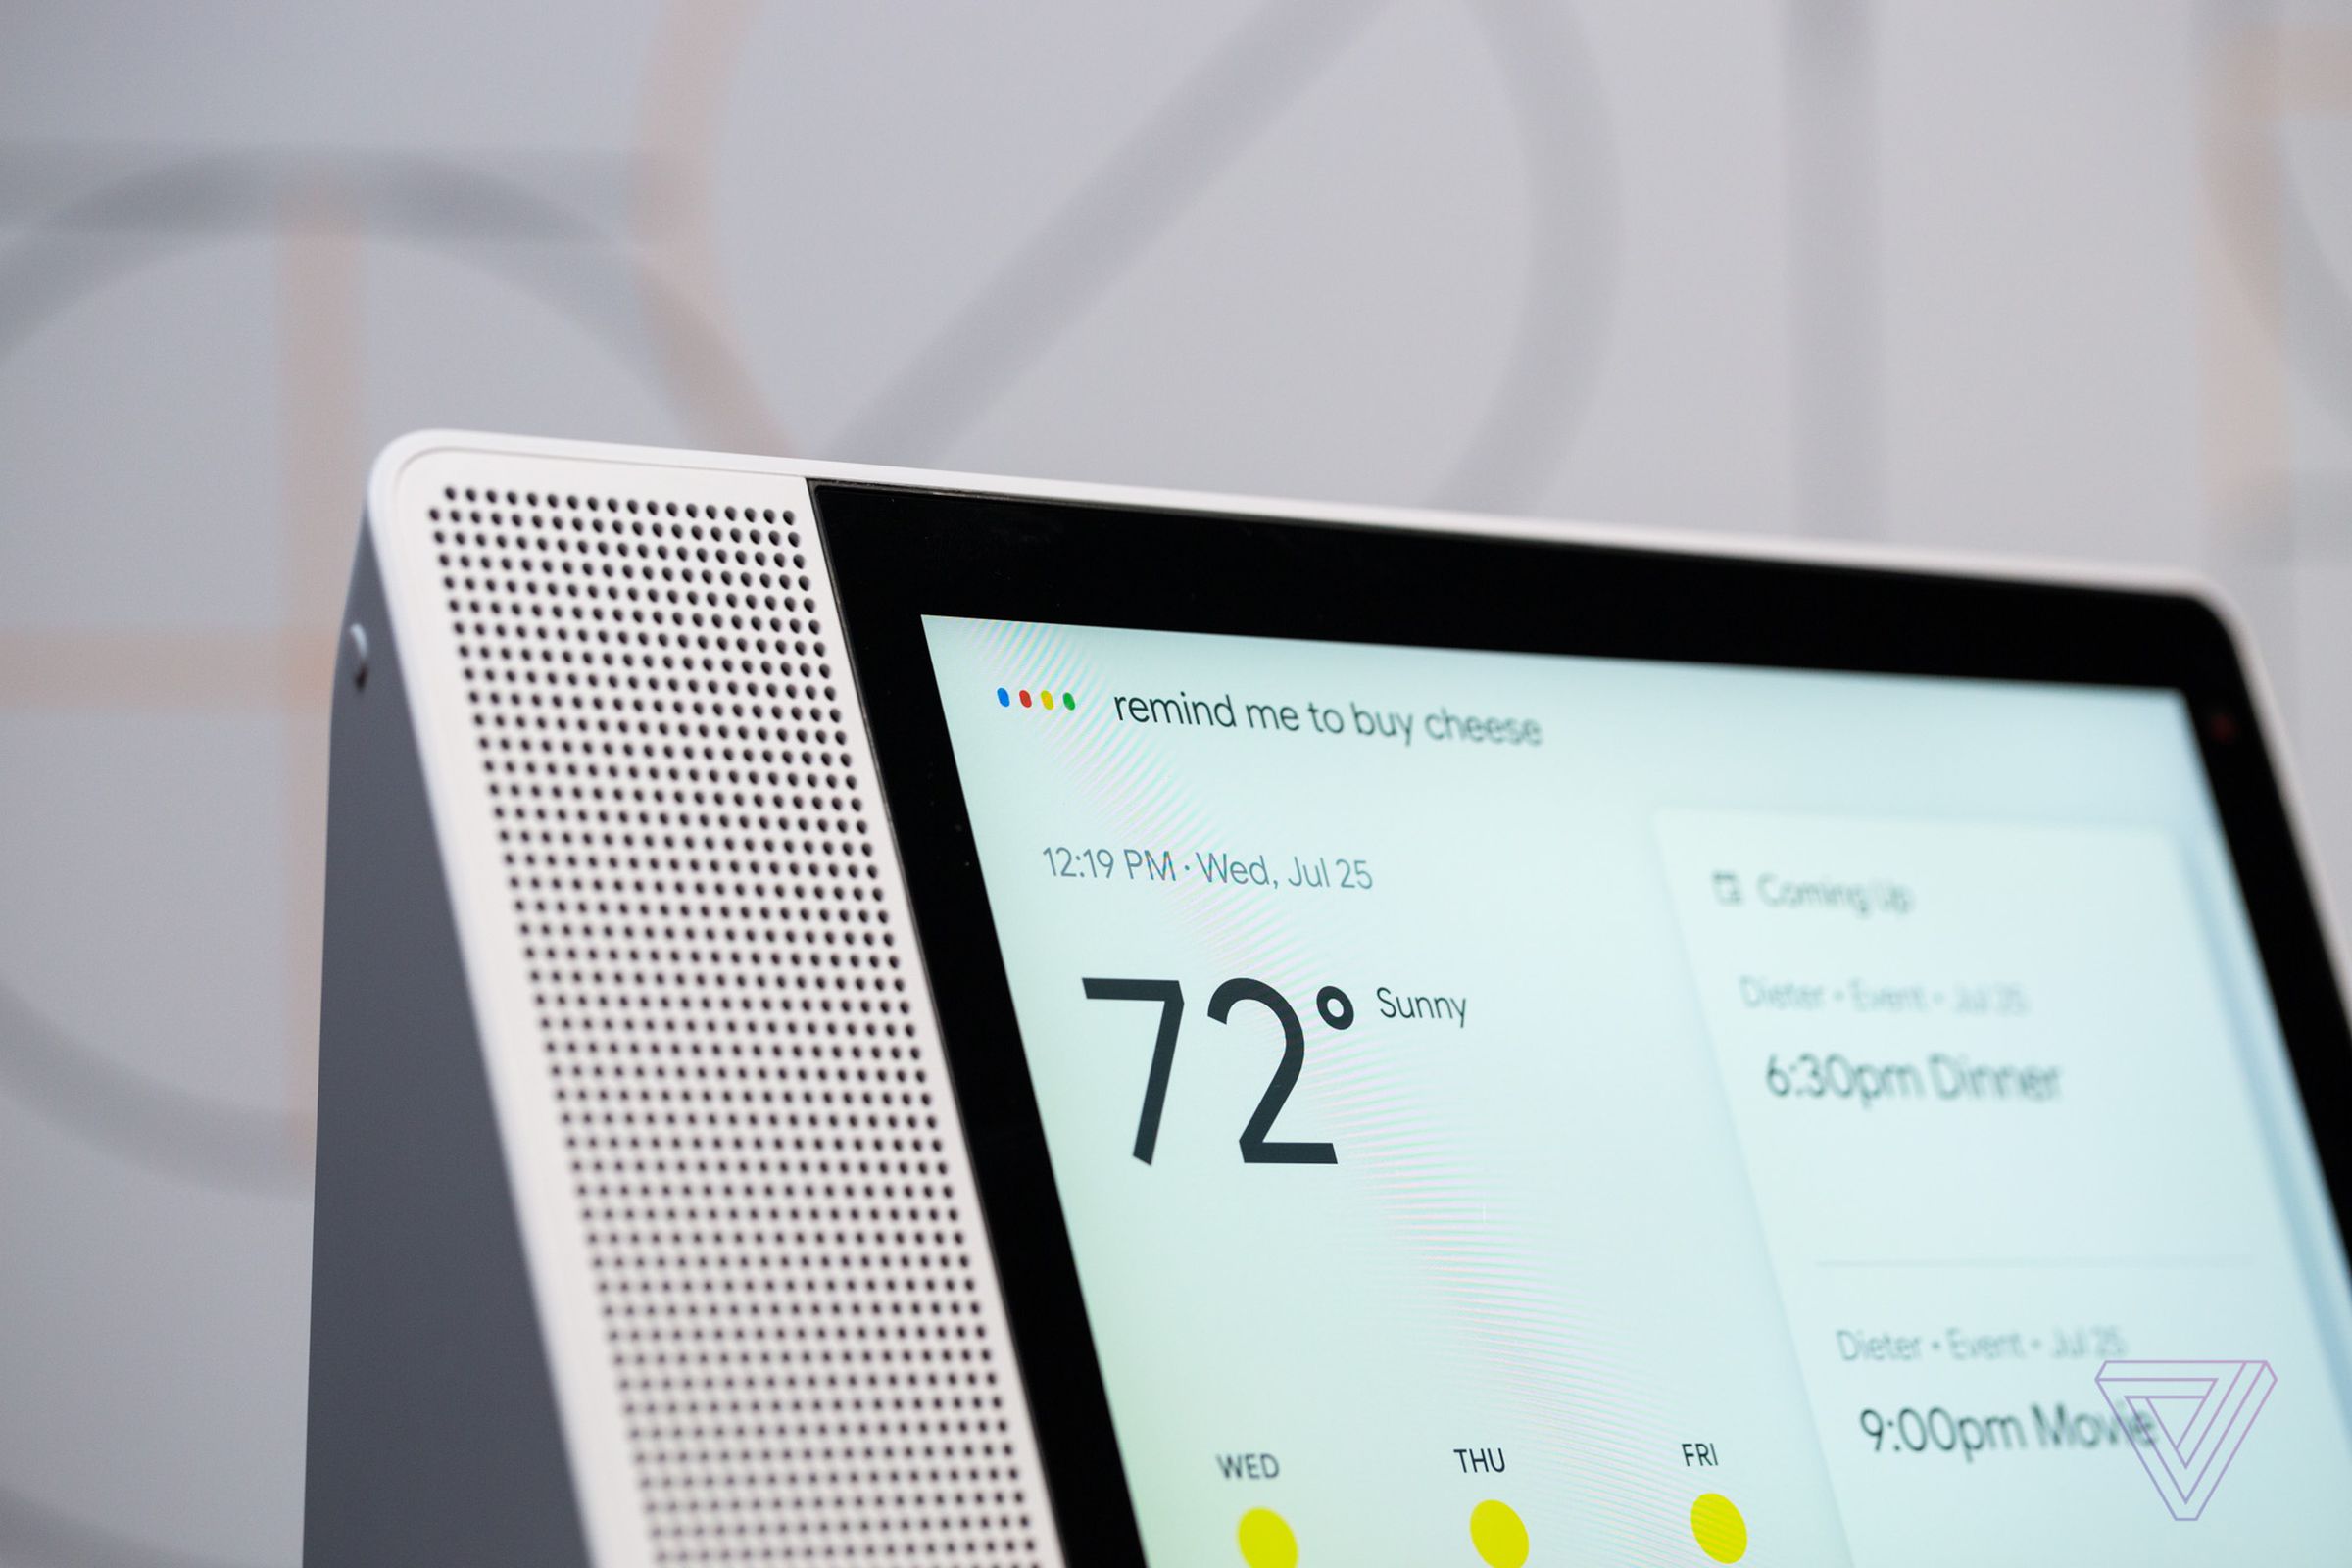 Lenovo’s Smart Display integrated nicely with all Google’s services. 